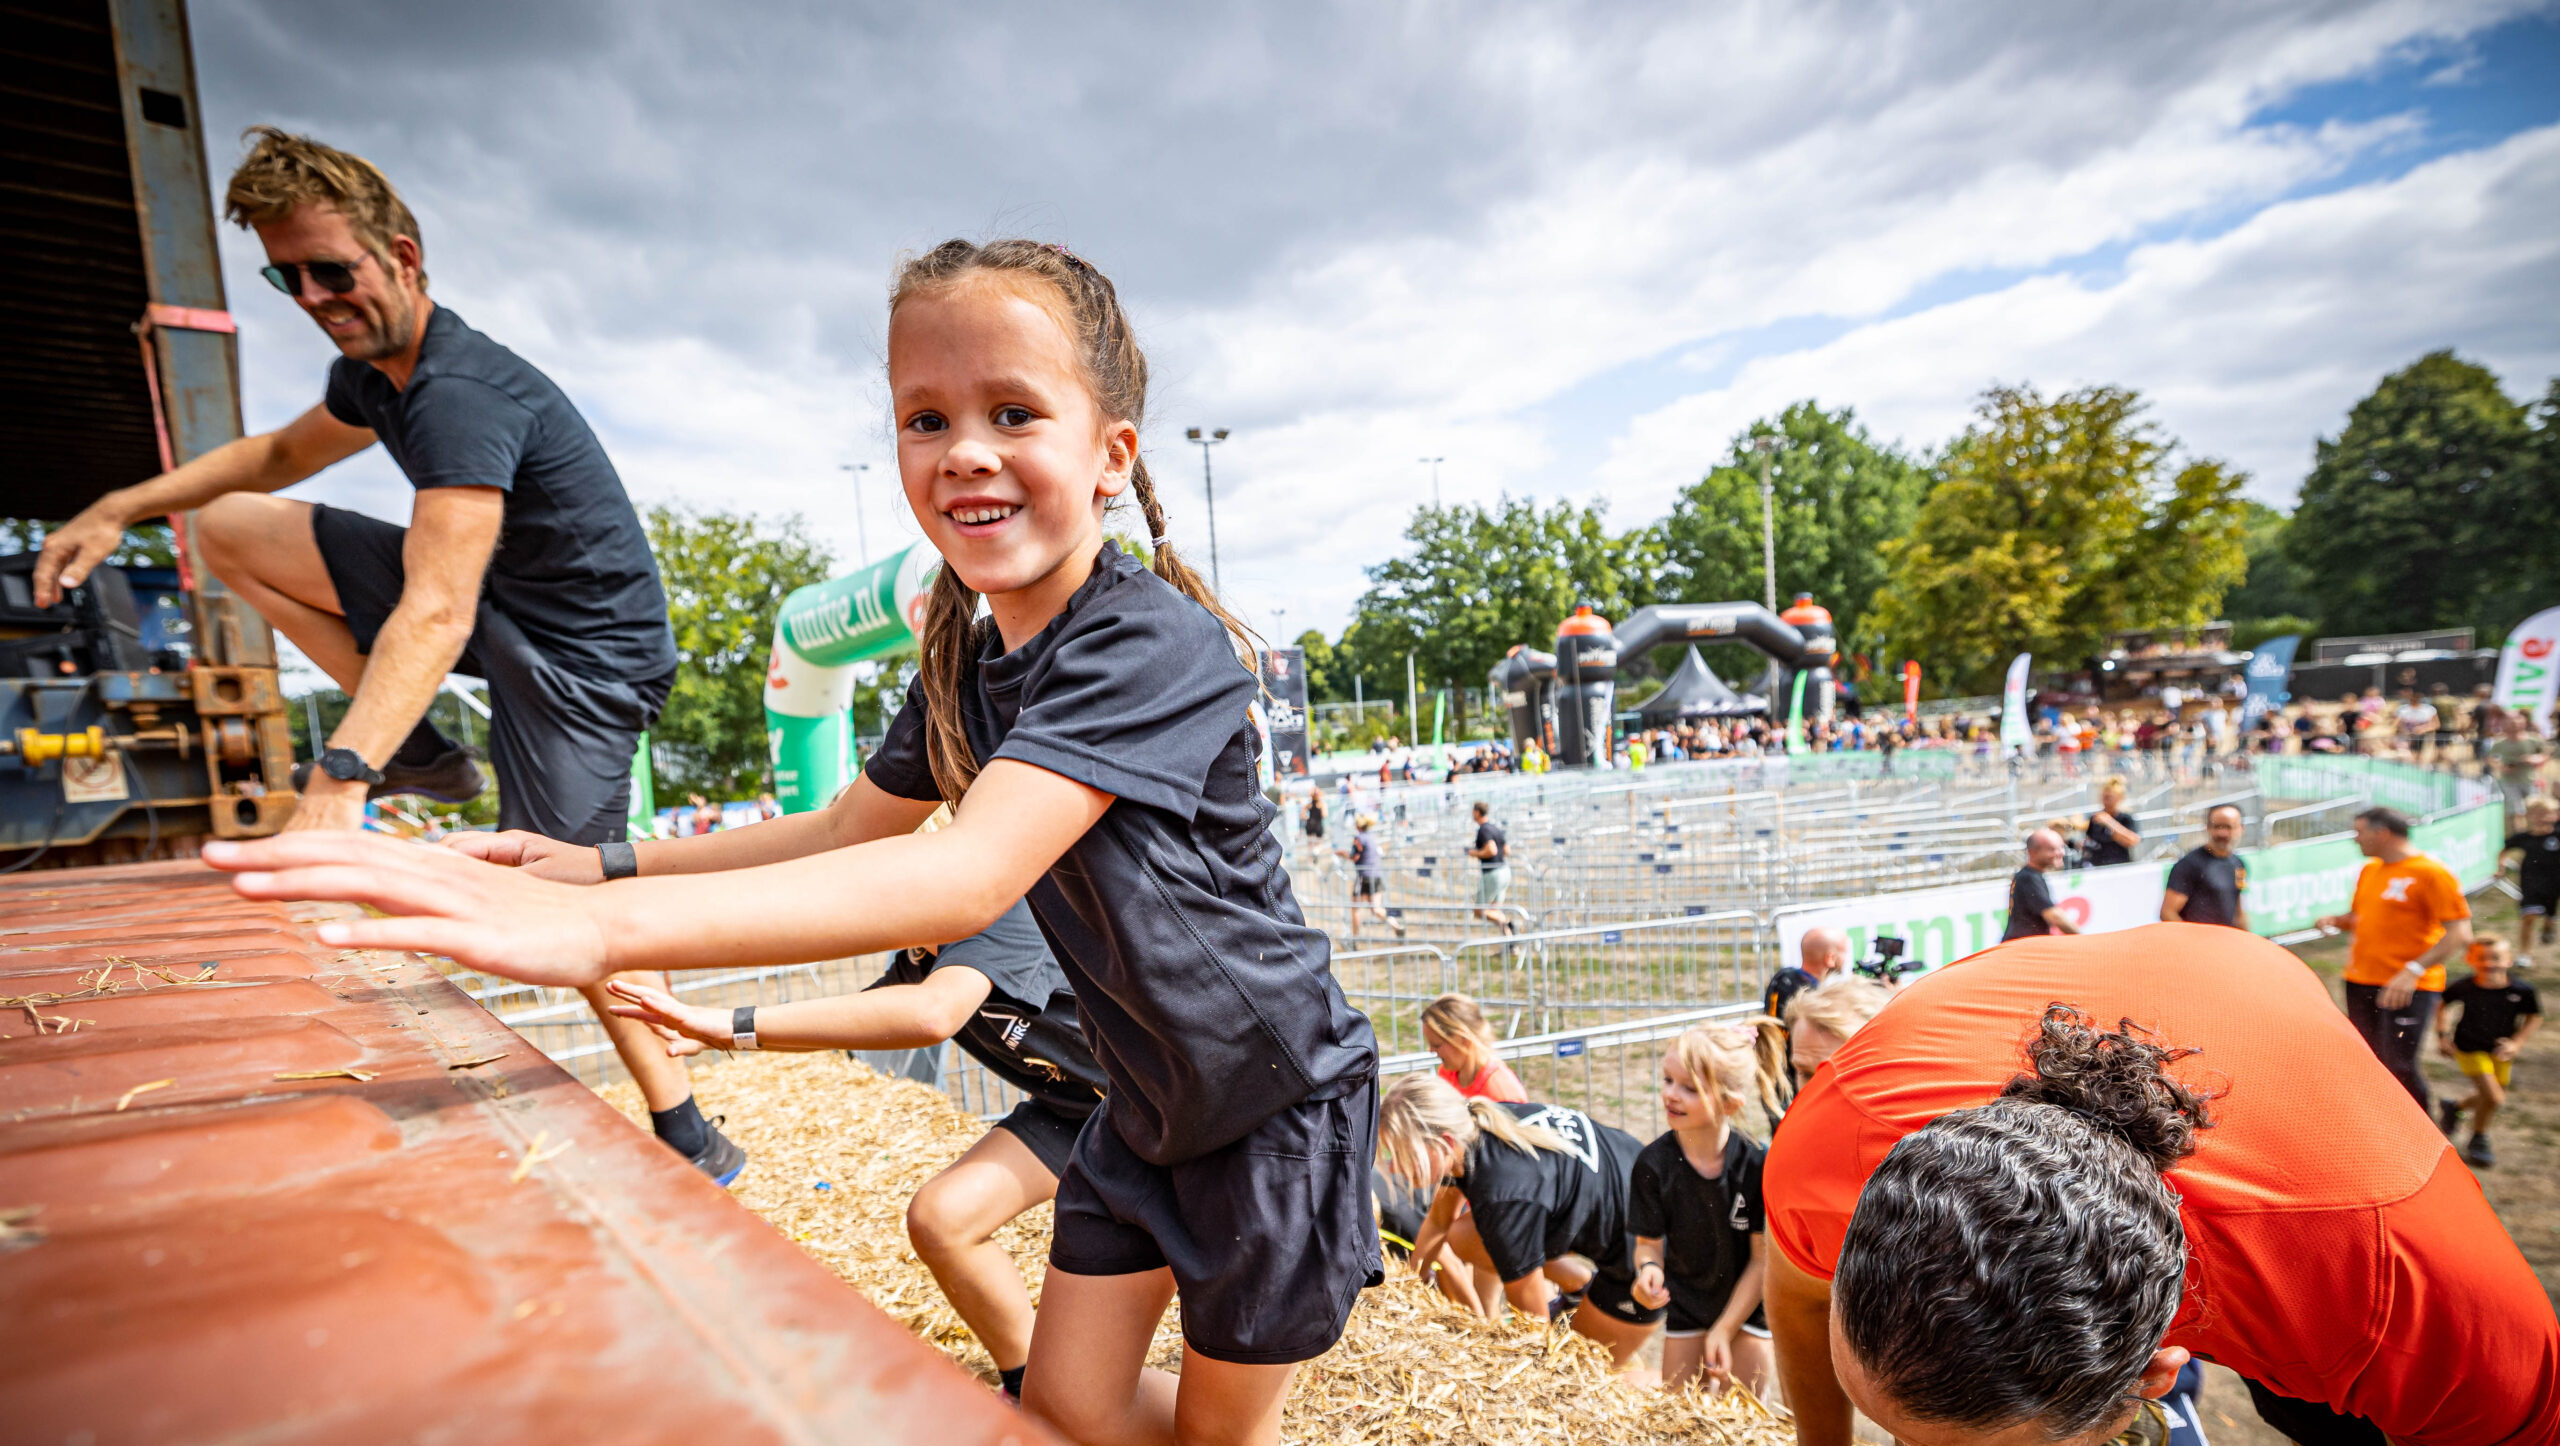 KIDS OBSTACLE RUN